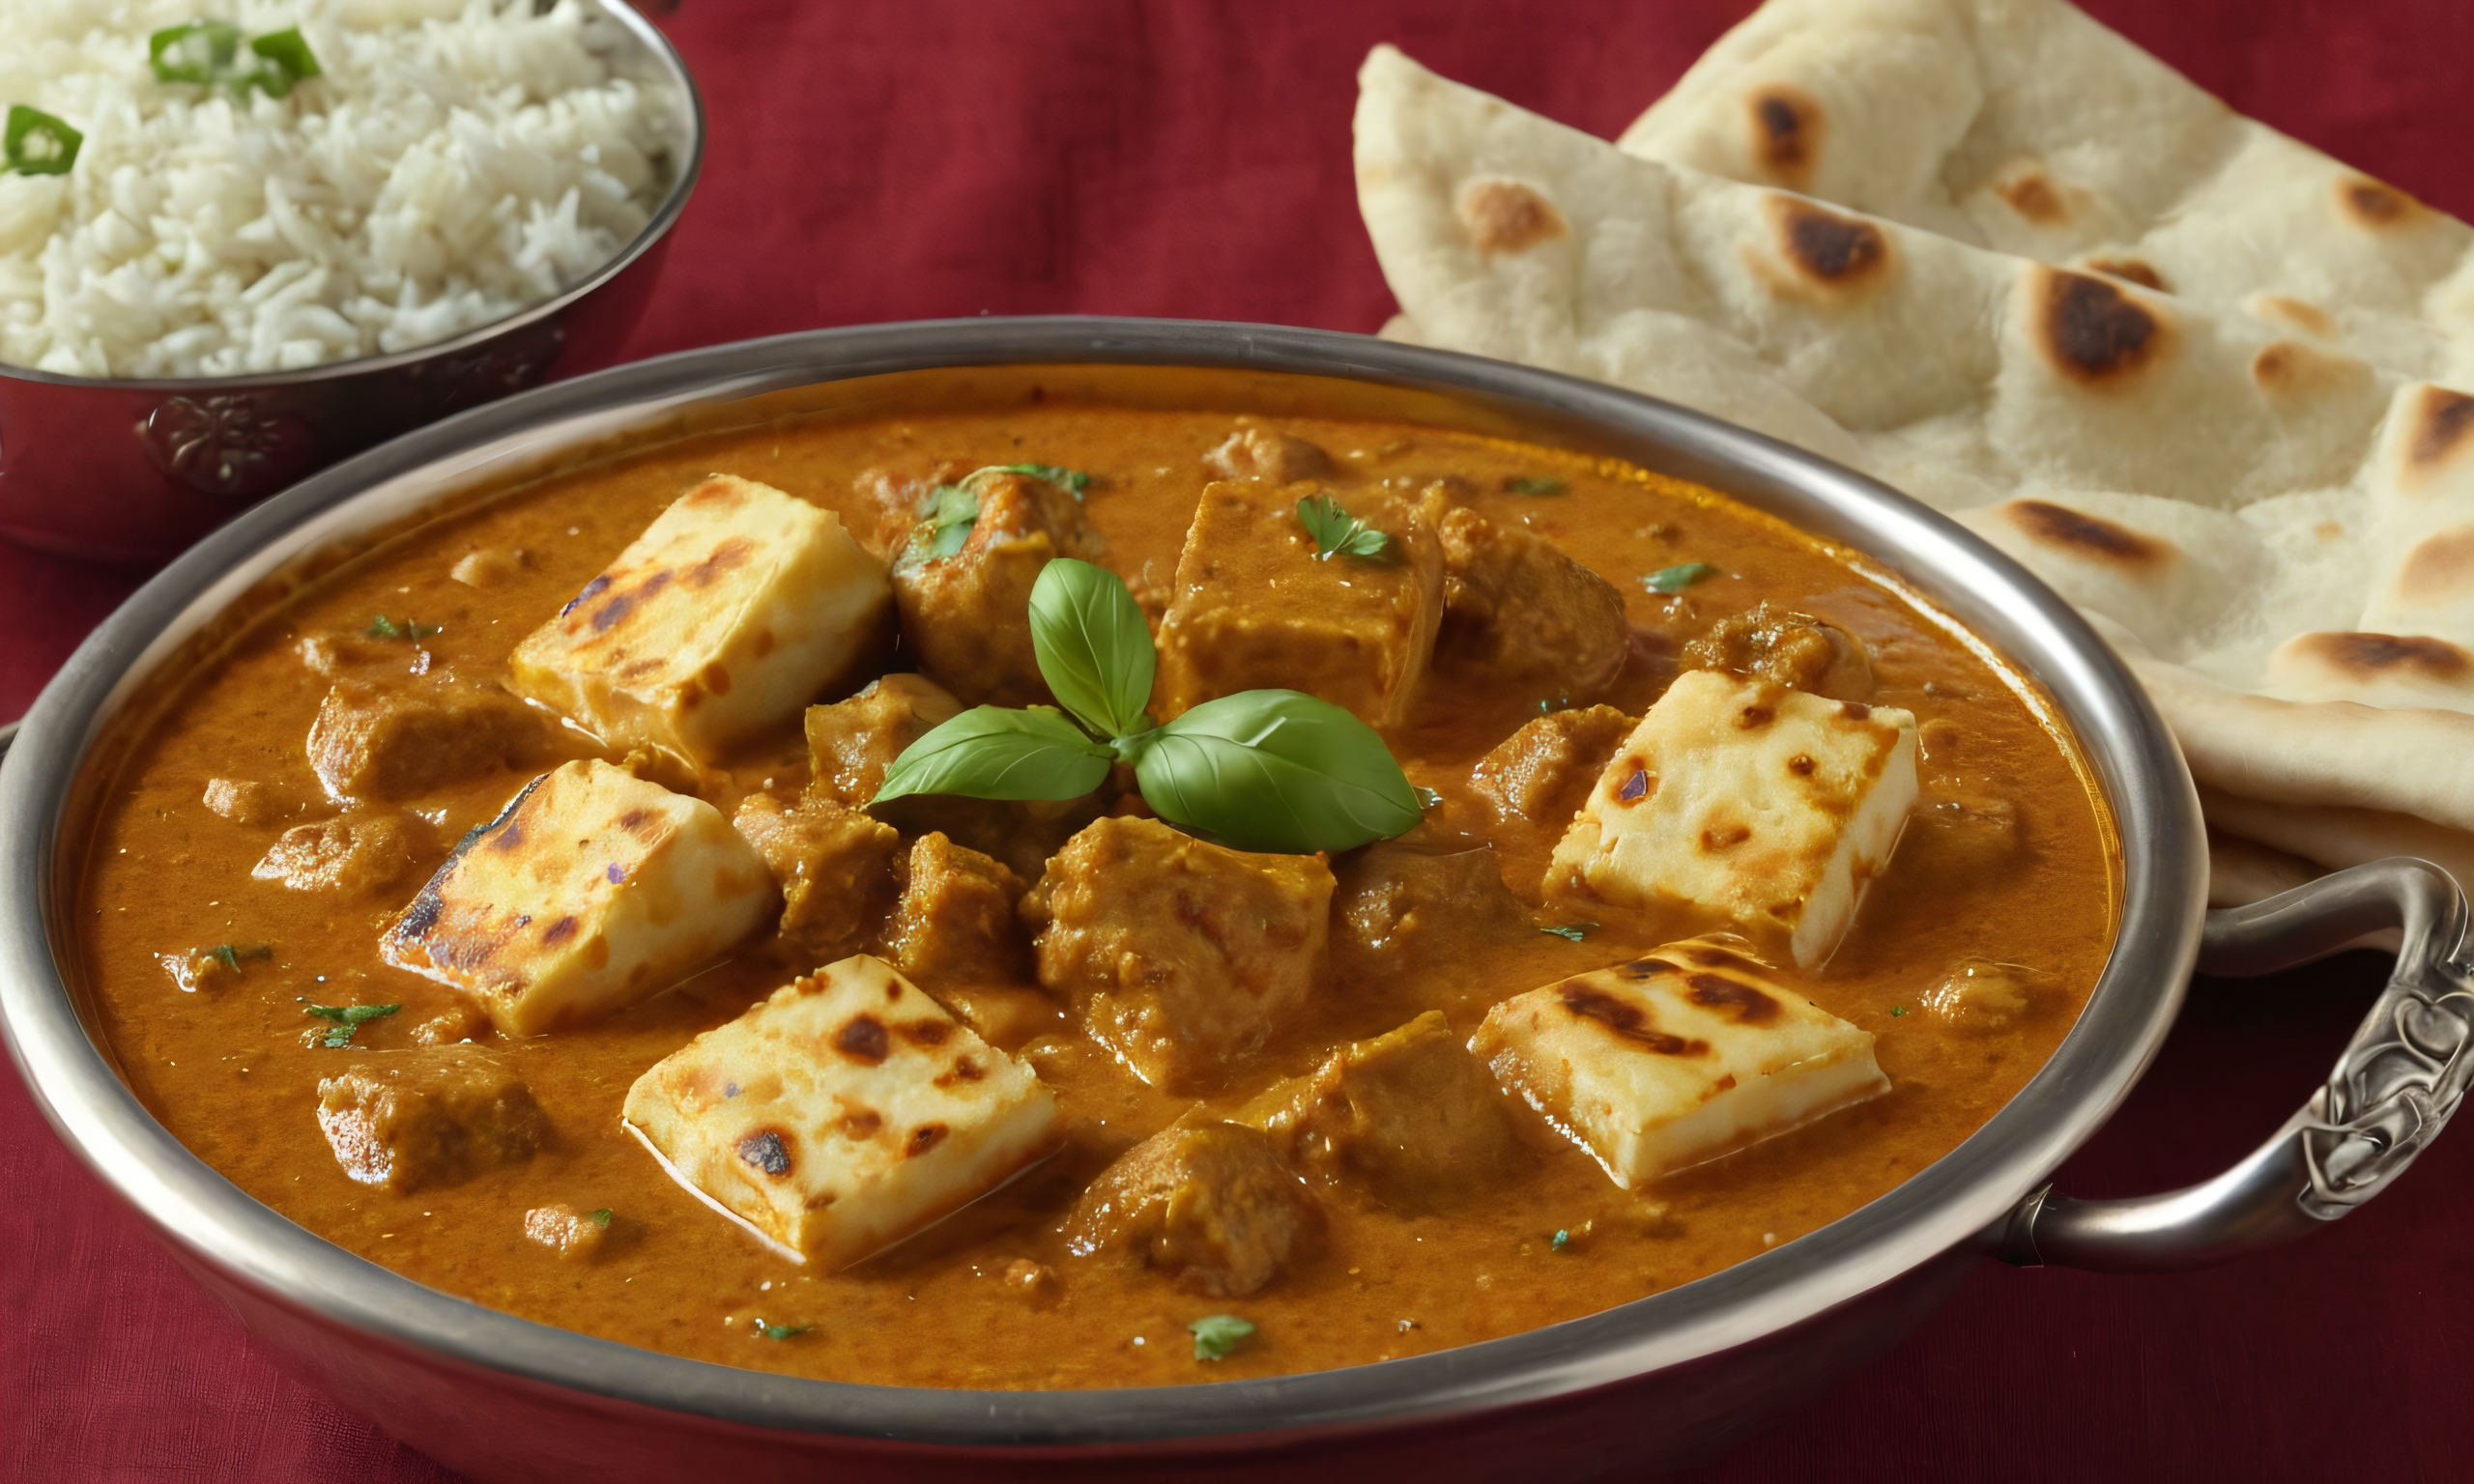 Delicious Paneer curry in rich brown sauce